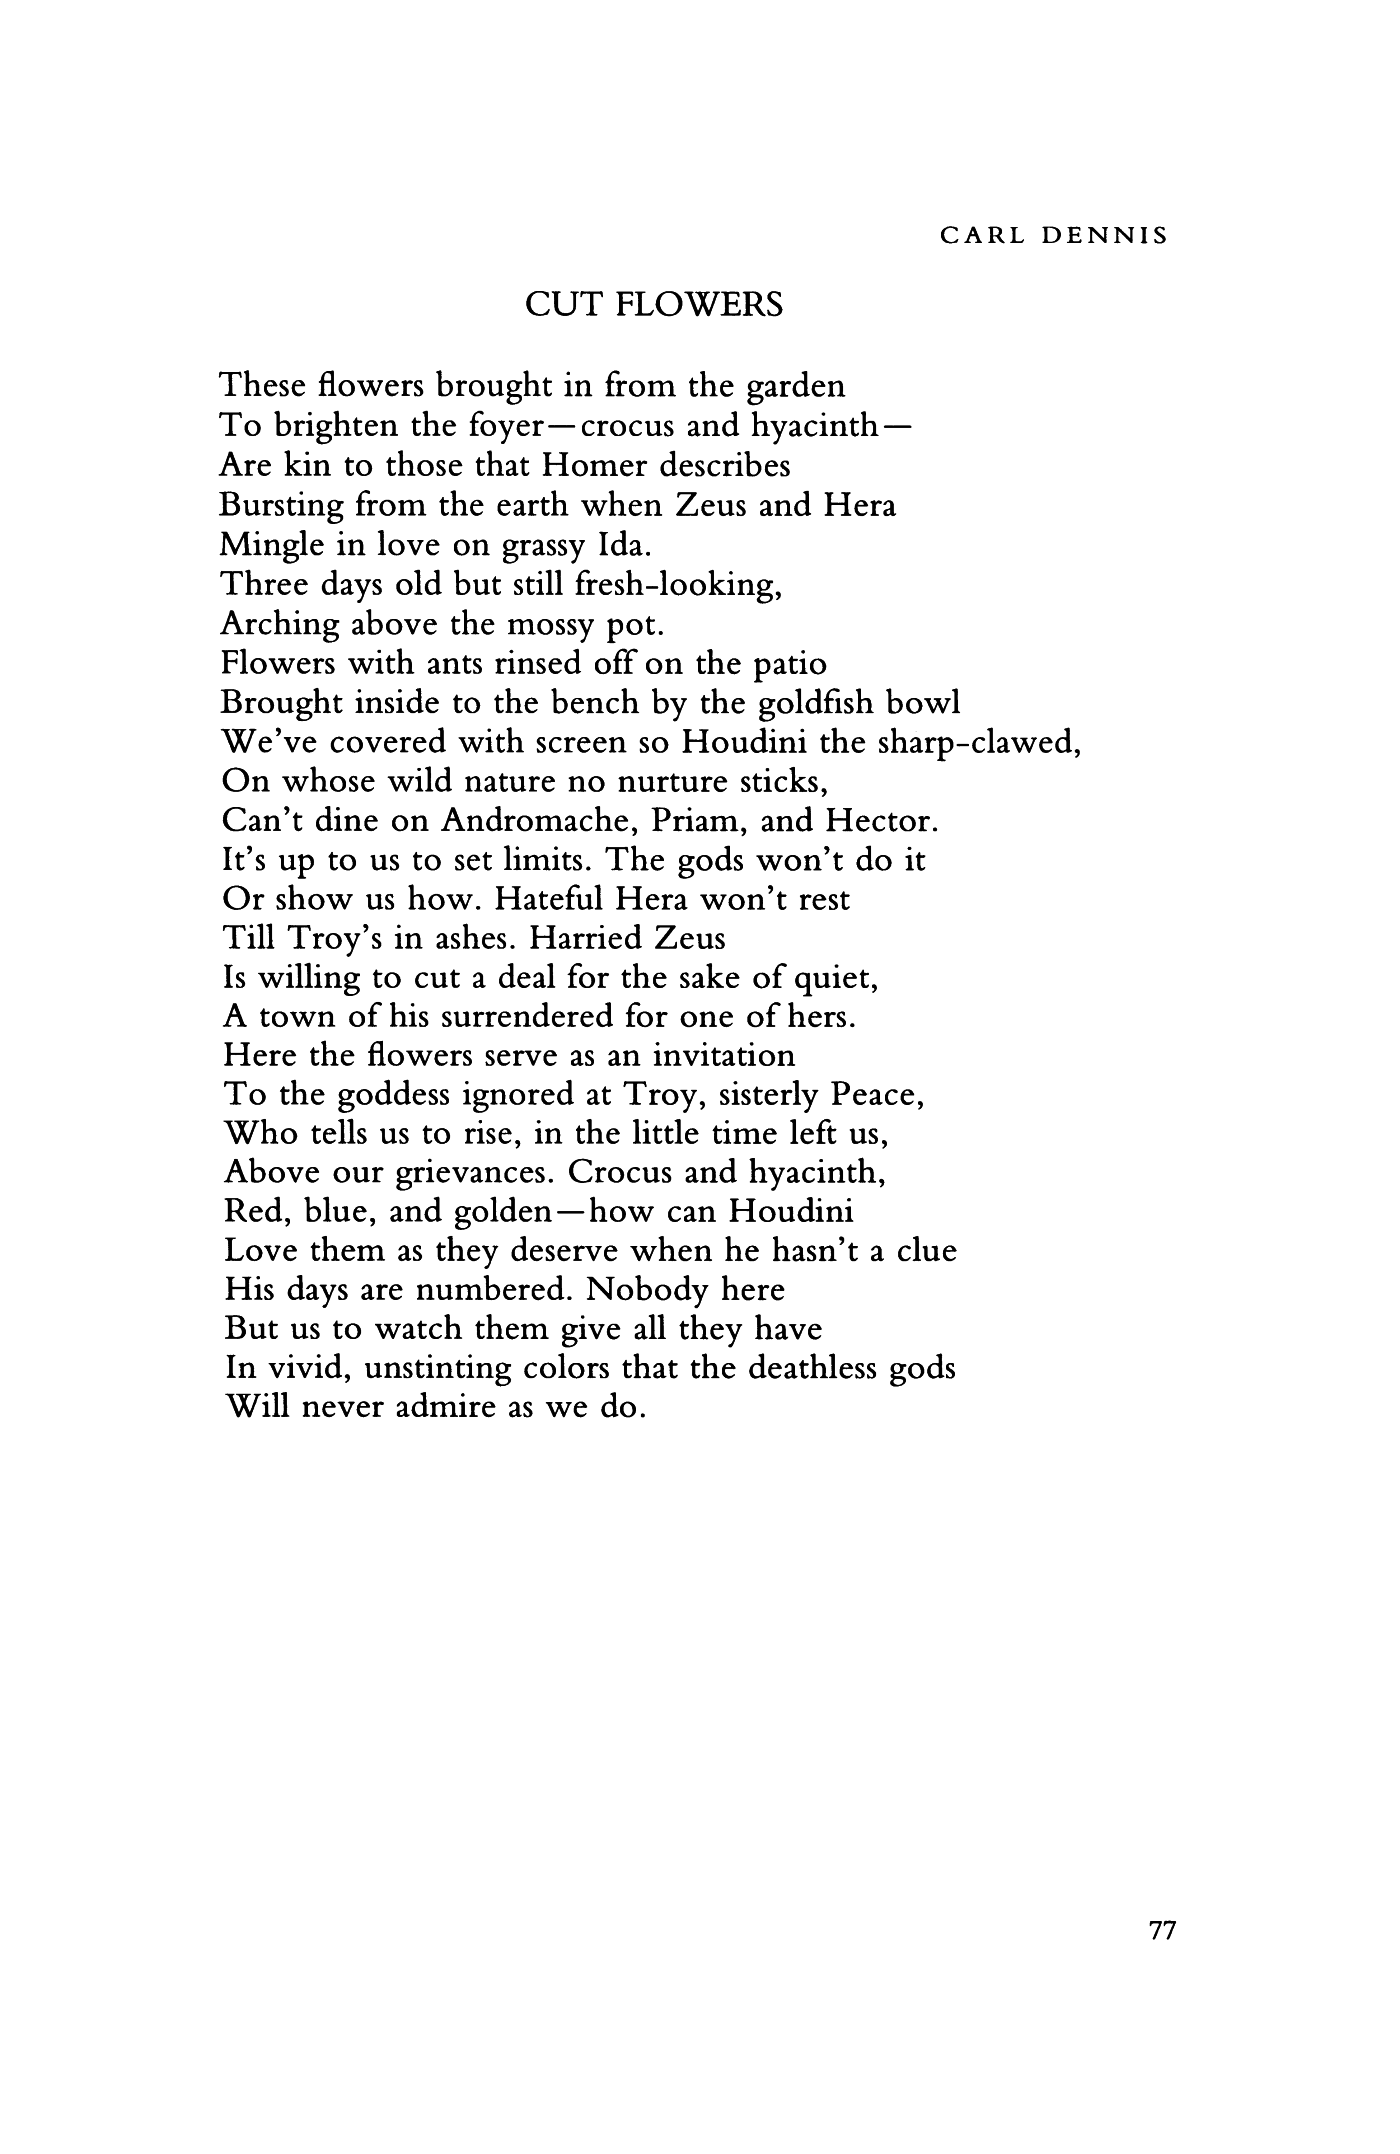 poems about cutting